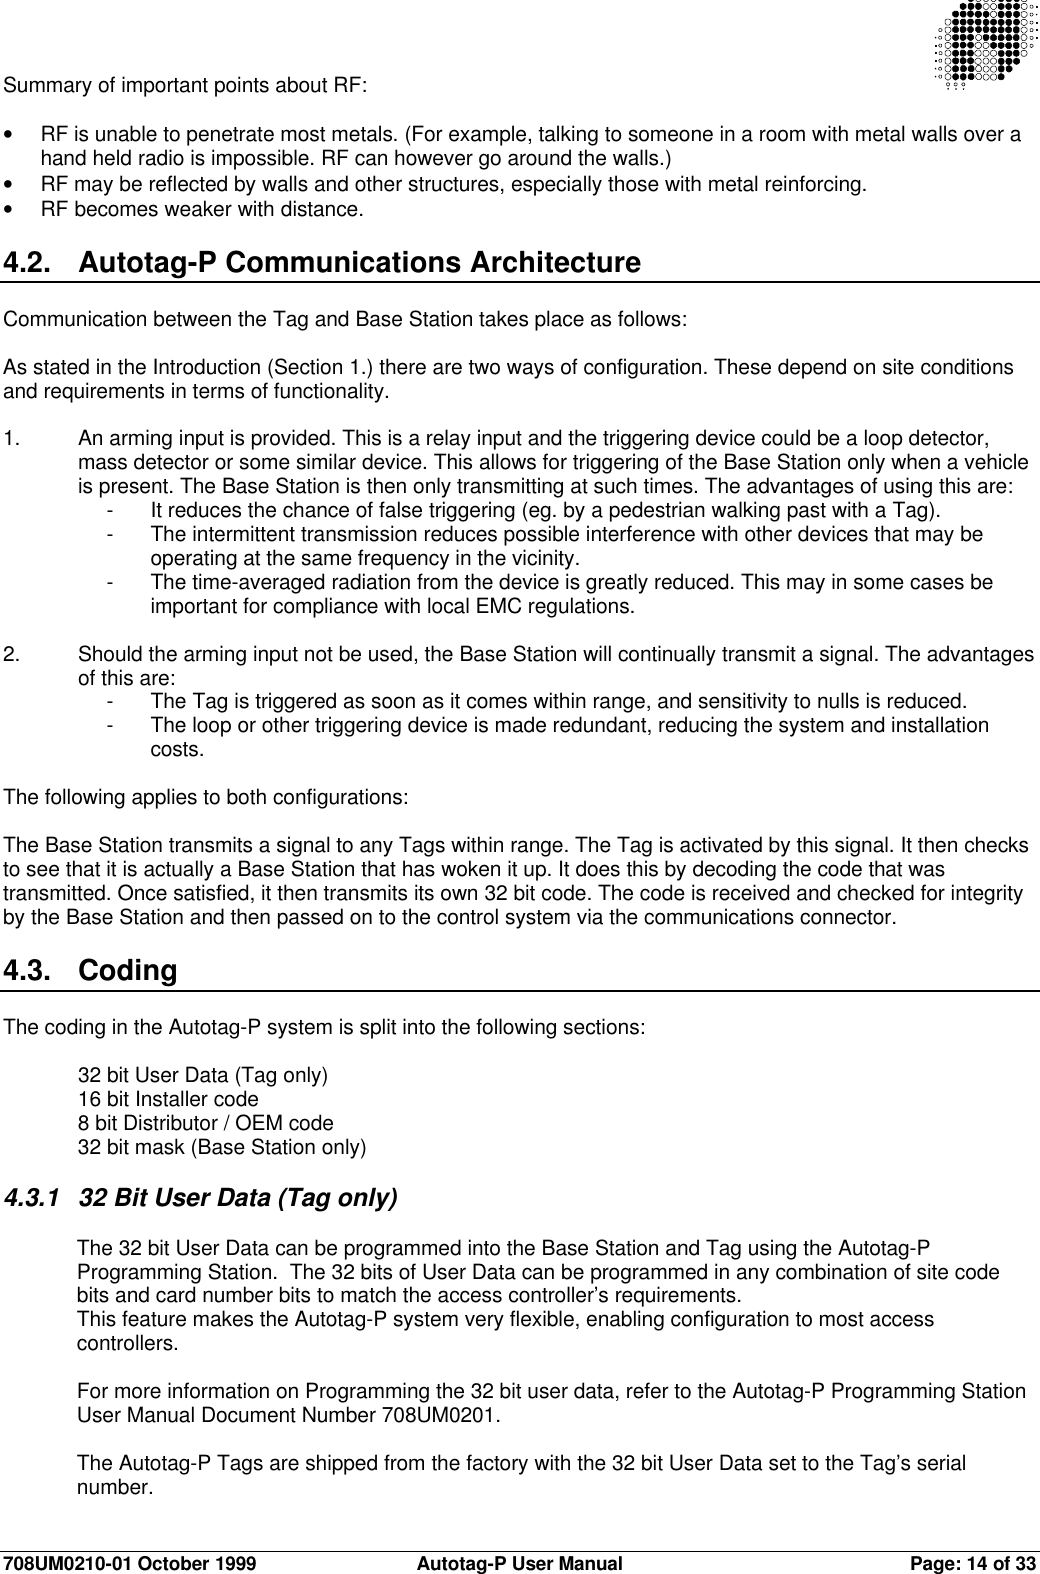 708UM0210-01 October 1999 Autotag-P User Manual Page: 14 of 33Summary of important points about RF:• RF is unable to penetrate most metals. (For example, talking to someone in a room with metal walls over ahand held radio is impossible. RF can however go around the walls.)• RF may be reflected by walls and other structures, especially those with metal reinforcing.• RF becomes weaker with distance.4.2. Autotag-P Communications ArchitectureCommunication between the Tag and Base Station takes place as follows:As stated in the Introduction (Section 1.) there are two ways of configuration. These depend on site conditionsand requirements in terms of functionality.1. An arming input is provided. This is a relay input and the triggering device could be a loop detector,mass detector or some similar device. This allows for triggering of the Base Station only when a vehicleis present. The Base Station is then only transmitting at such times. The advantages of using this are:-It reduces the chance of false triggering (eg. by a pedestrian walking past with a Tag).-The intermittent transmission reduces possible interference with other devices that may beoperating at the same frequency in the vicinity.-The time-averaged radiation from the device is greatly reduced. This may in some cases beimportant for compliance with local EMC regulations.2. Should the arming input not be used, the Base Station will continually transmit a signal. The advantagesof this are:-The Tag is triggered as soon as it comes within range, and sensitivity to nulls is reduced.-The loop or other triggering device is made redundant, reducing the system and installationcosts.The following applies to both configurations:The Base Station transmits a signal to any Tags within range. The Tag is activated by this signal. It then checksto see that it is actually a Base Station that has woken it up. It does this by decoding the code that wastransmitted. Once satisfied, it then transmits its own 32 bit code. The code is received and checked for integrityby the Base Station and then passed on to the control system via the communications connector.4.3. CodingThe coding in the Autotag-P system is split into the following sections:32 bit User Data (Tag only)16 bit Installer code8 bit Distributor / OEM code32 bit mask (Base Station only)4.3.1 32 Bit User Data (Tag only)The 32 bit User Data can be programmed into the Base Station and Tag using the Autotag-PProgramming Station.  The 32 bits of User Data can be programmed in any combination of site codebits and card number bits to match the access controller’s requirements.This feature makes the Autotag-P system very flexible, enabling configuration to most accesscontrollers.For more information on Programming the 32 bit user data, refer to the Autotag-P Programming StationUser Manual Document Number 708UM0201.The Autotag-P Tags are shipped from the factory with the 32 bit User Data set to the Tag’s serialnumber.